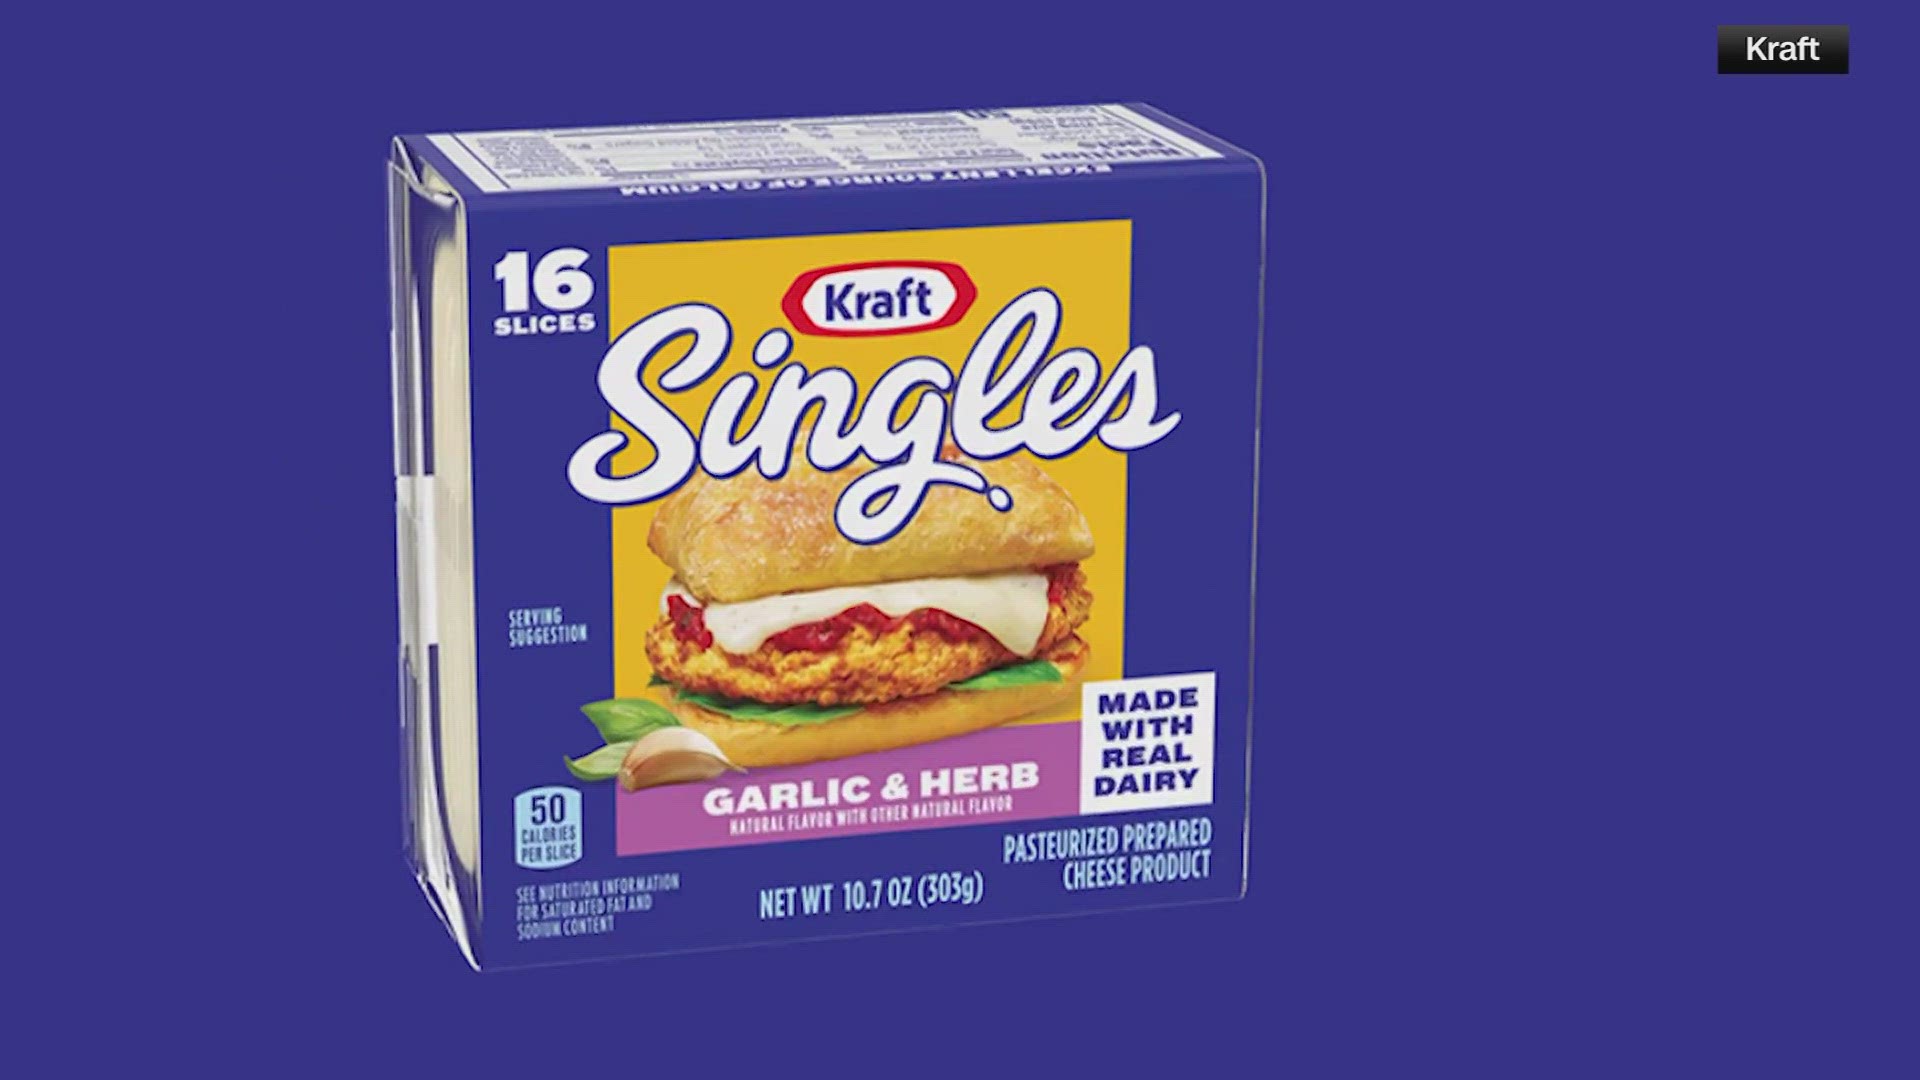 Kraft Singles introduced three new flavors of processed cheese slices: Jalapeño, Garlic & Herb, and Caramelized Onion.